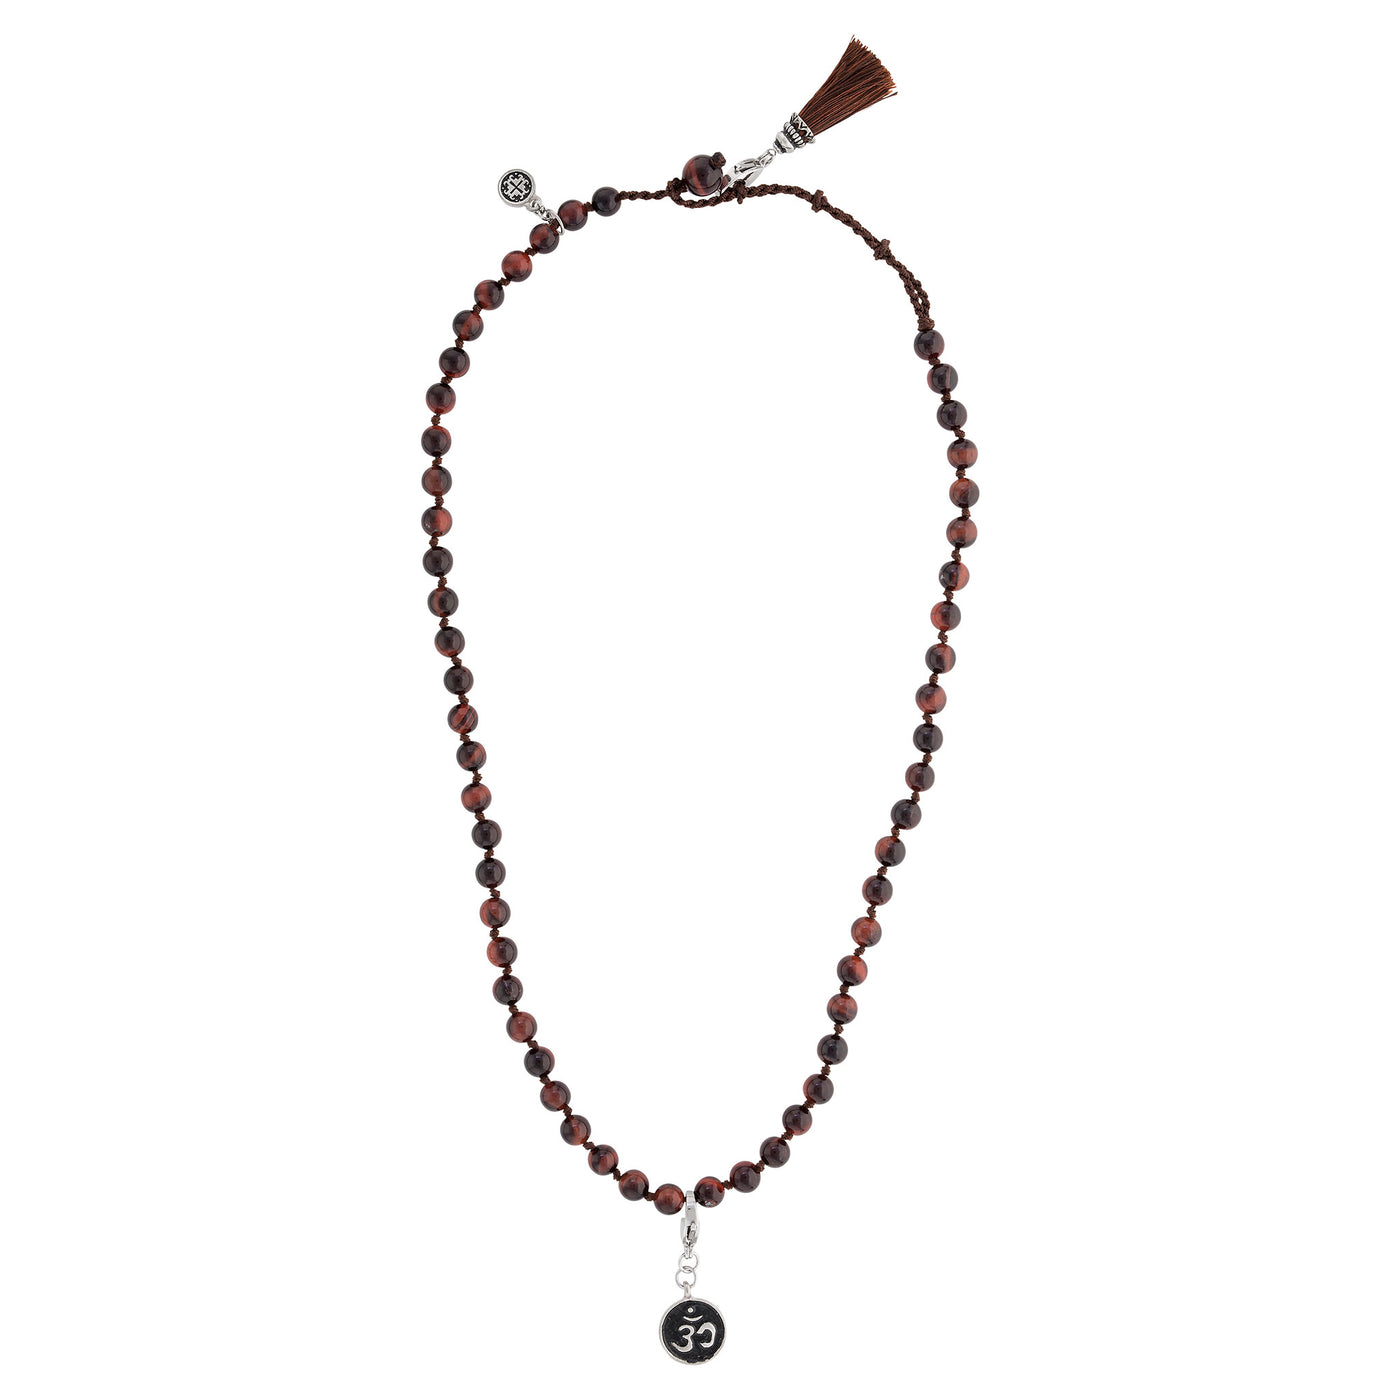 CONFIDENCE: Red Tiger's Eye Men's-Unisex 54 bead mala necklace